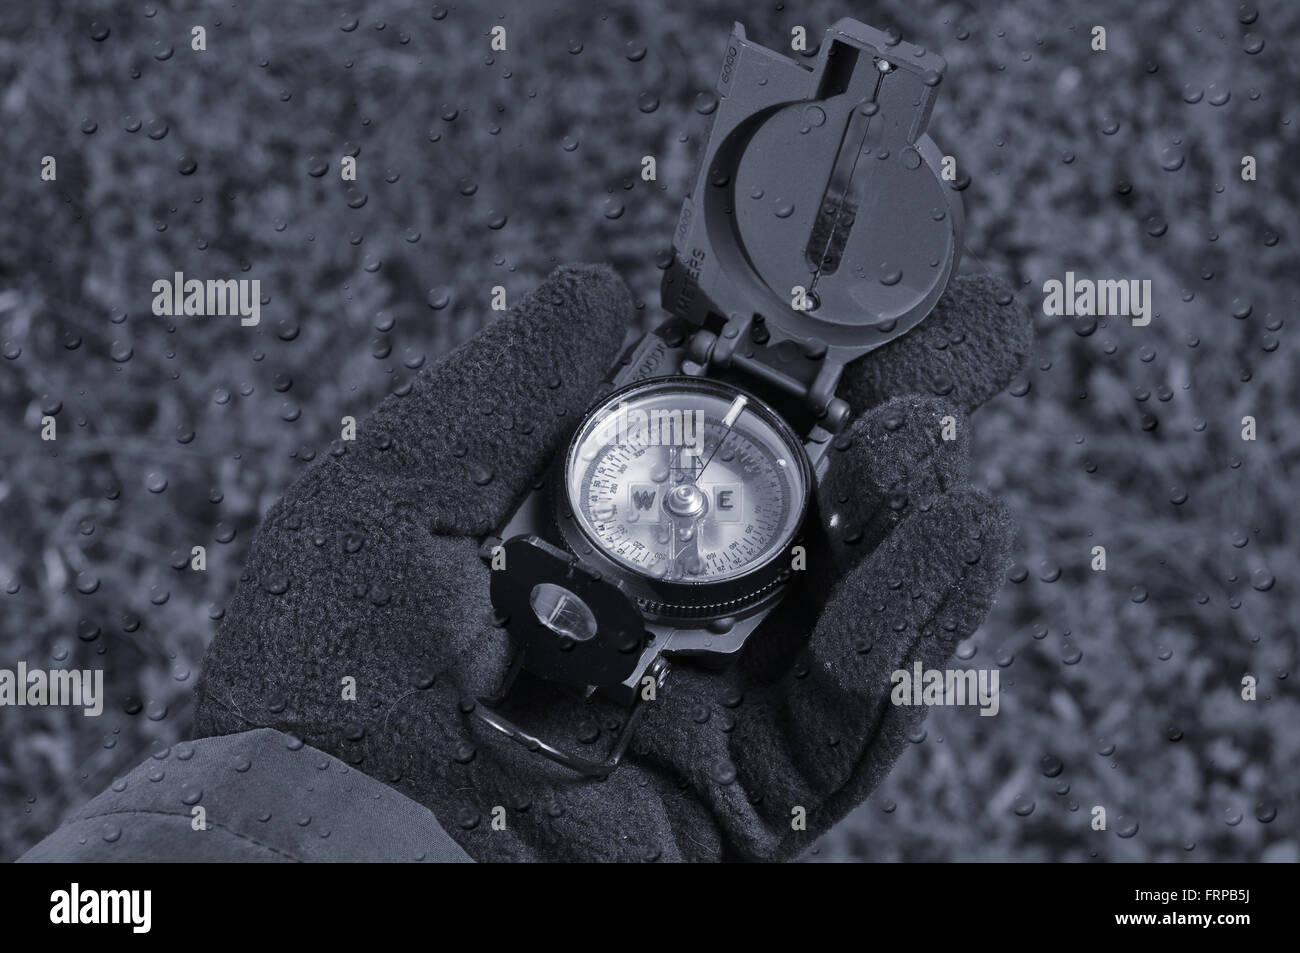 Handling a military compass. Survival, outdoors and military monochrome theme Stock Photo